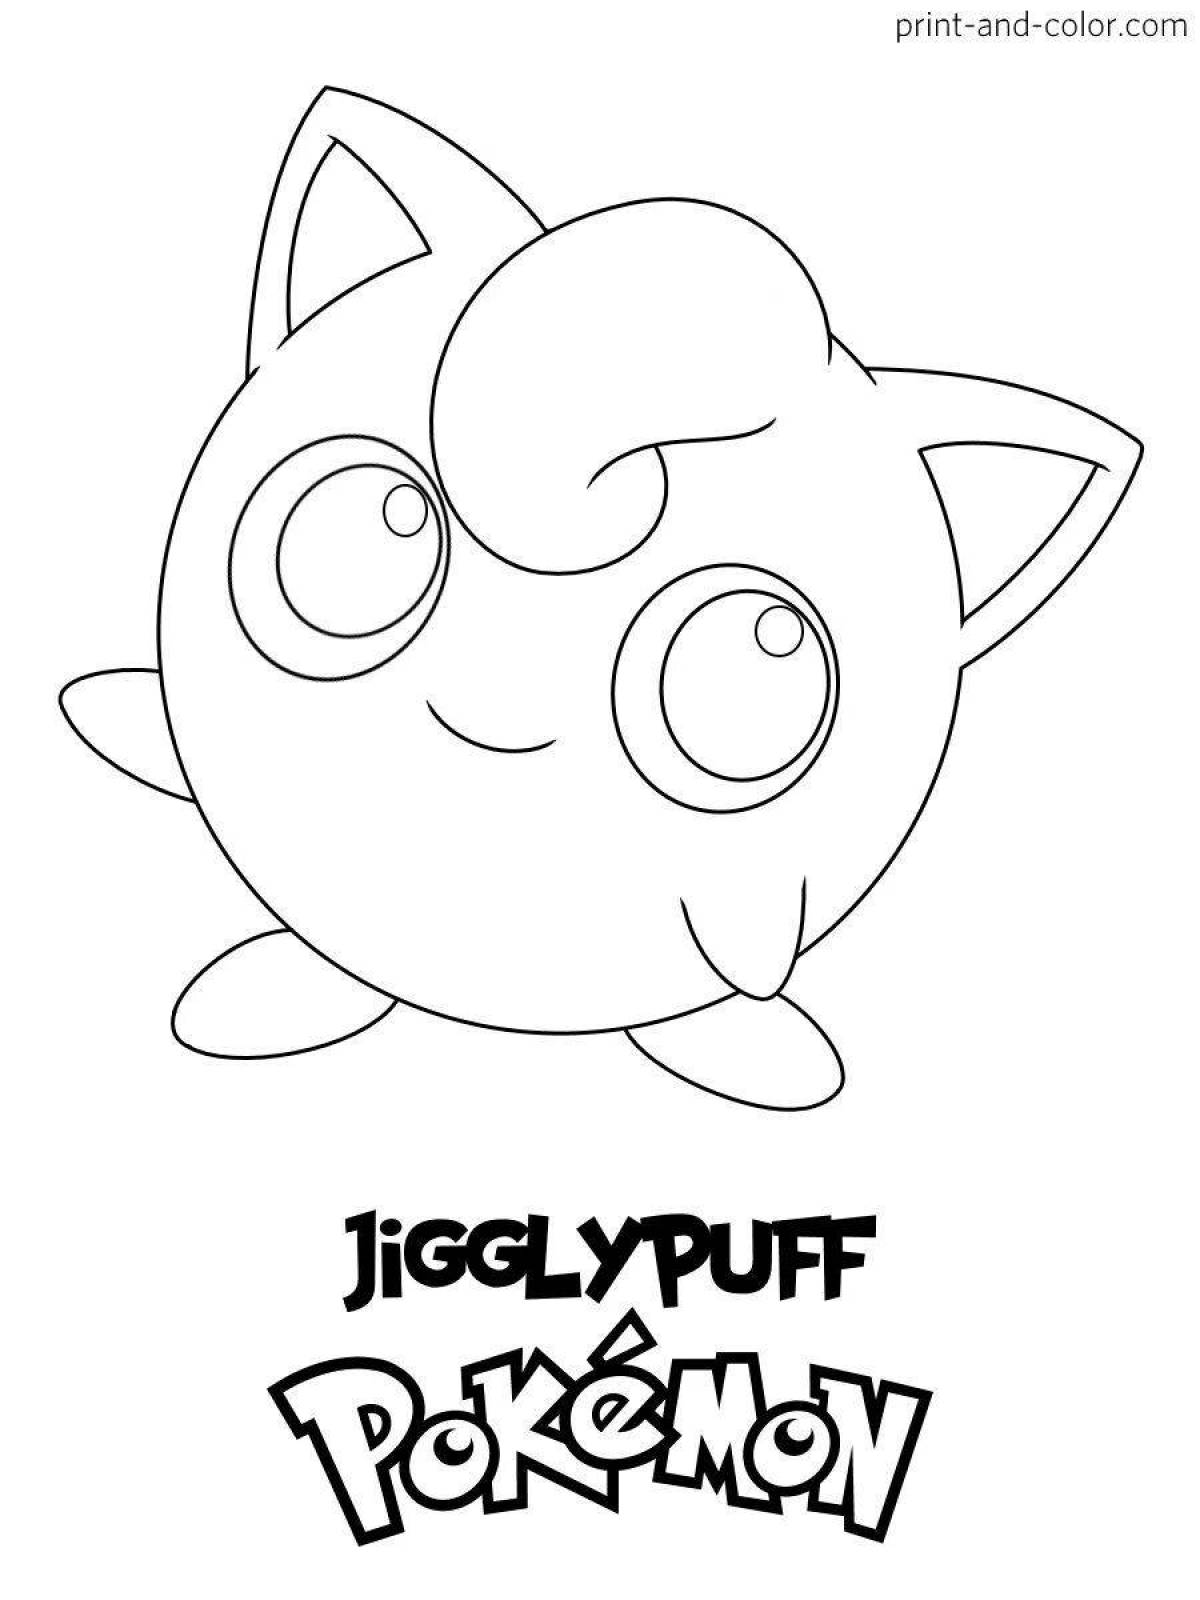 Coloring page happy jigglypuff